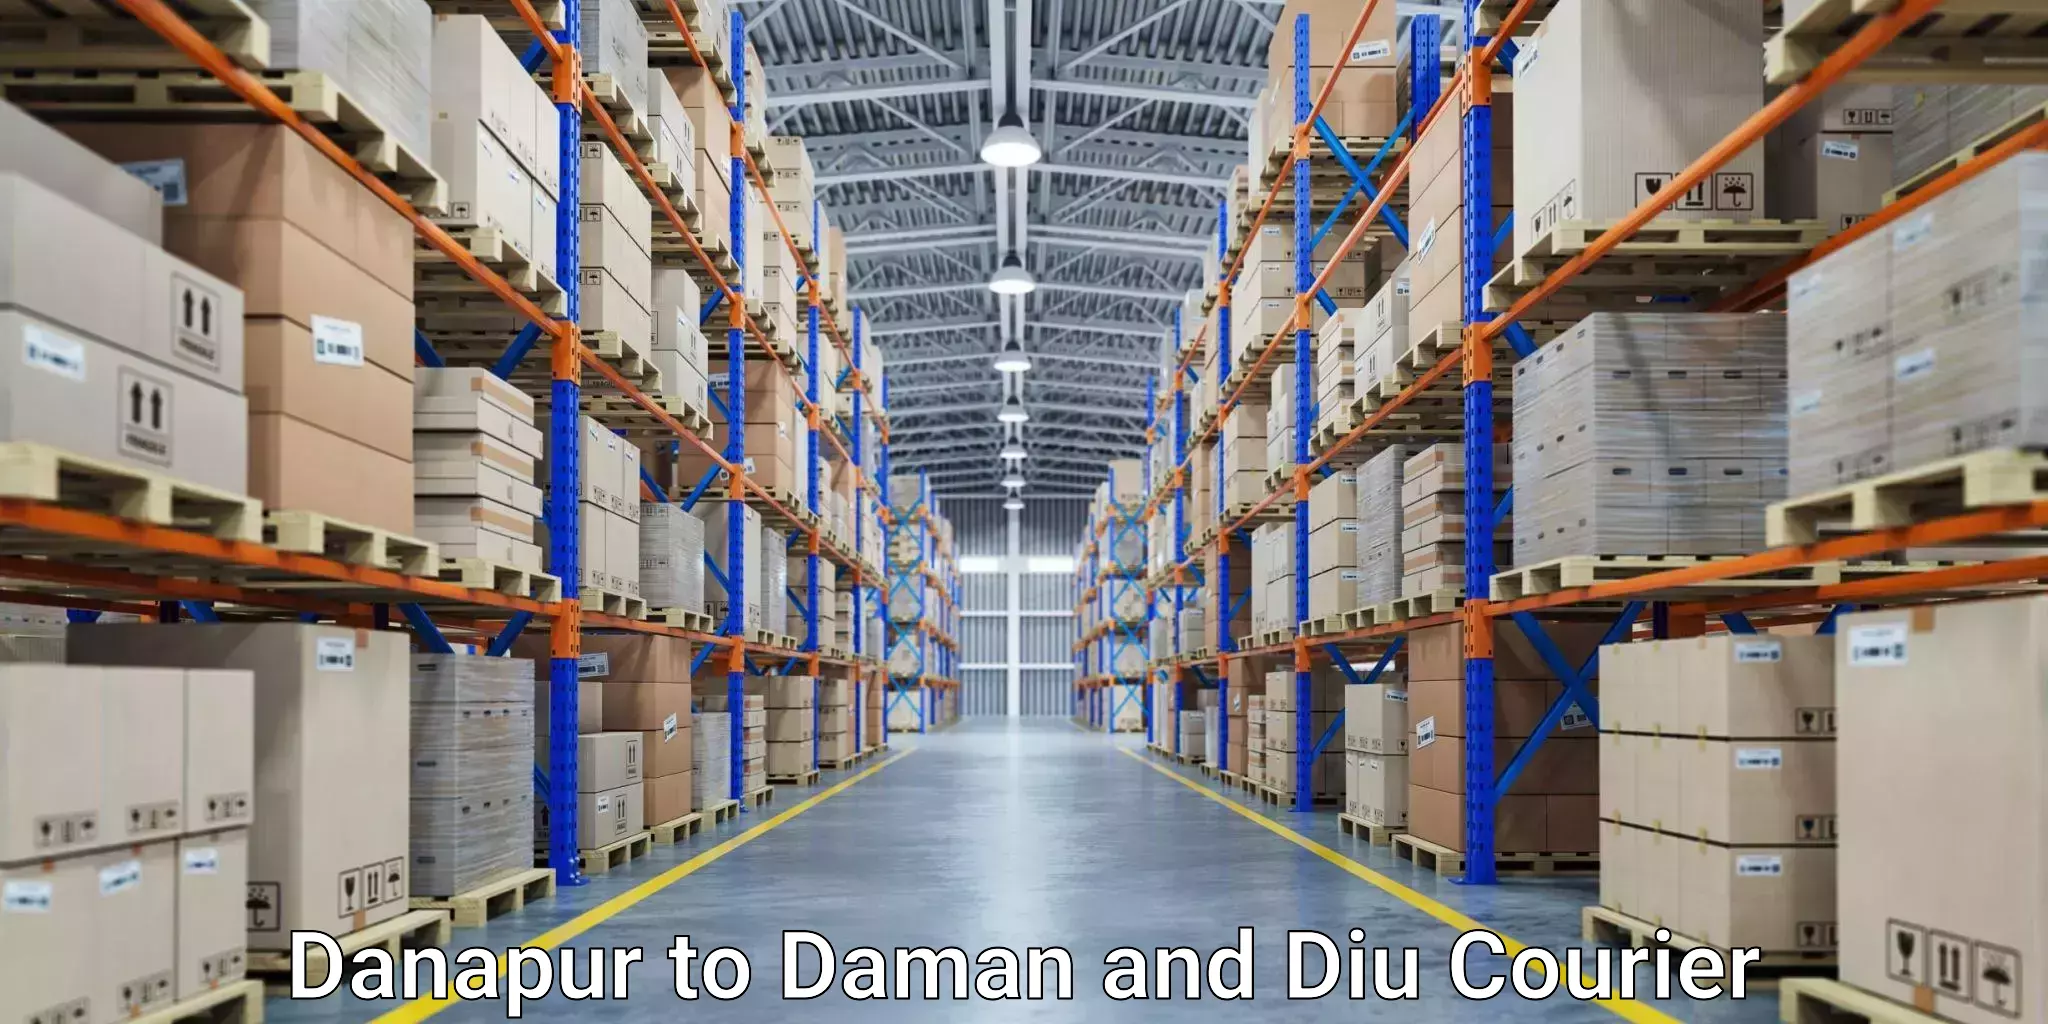 Fast delivery service Danapur to Daman and Diu